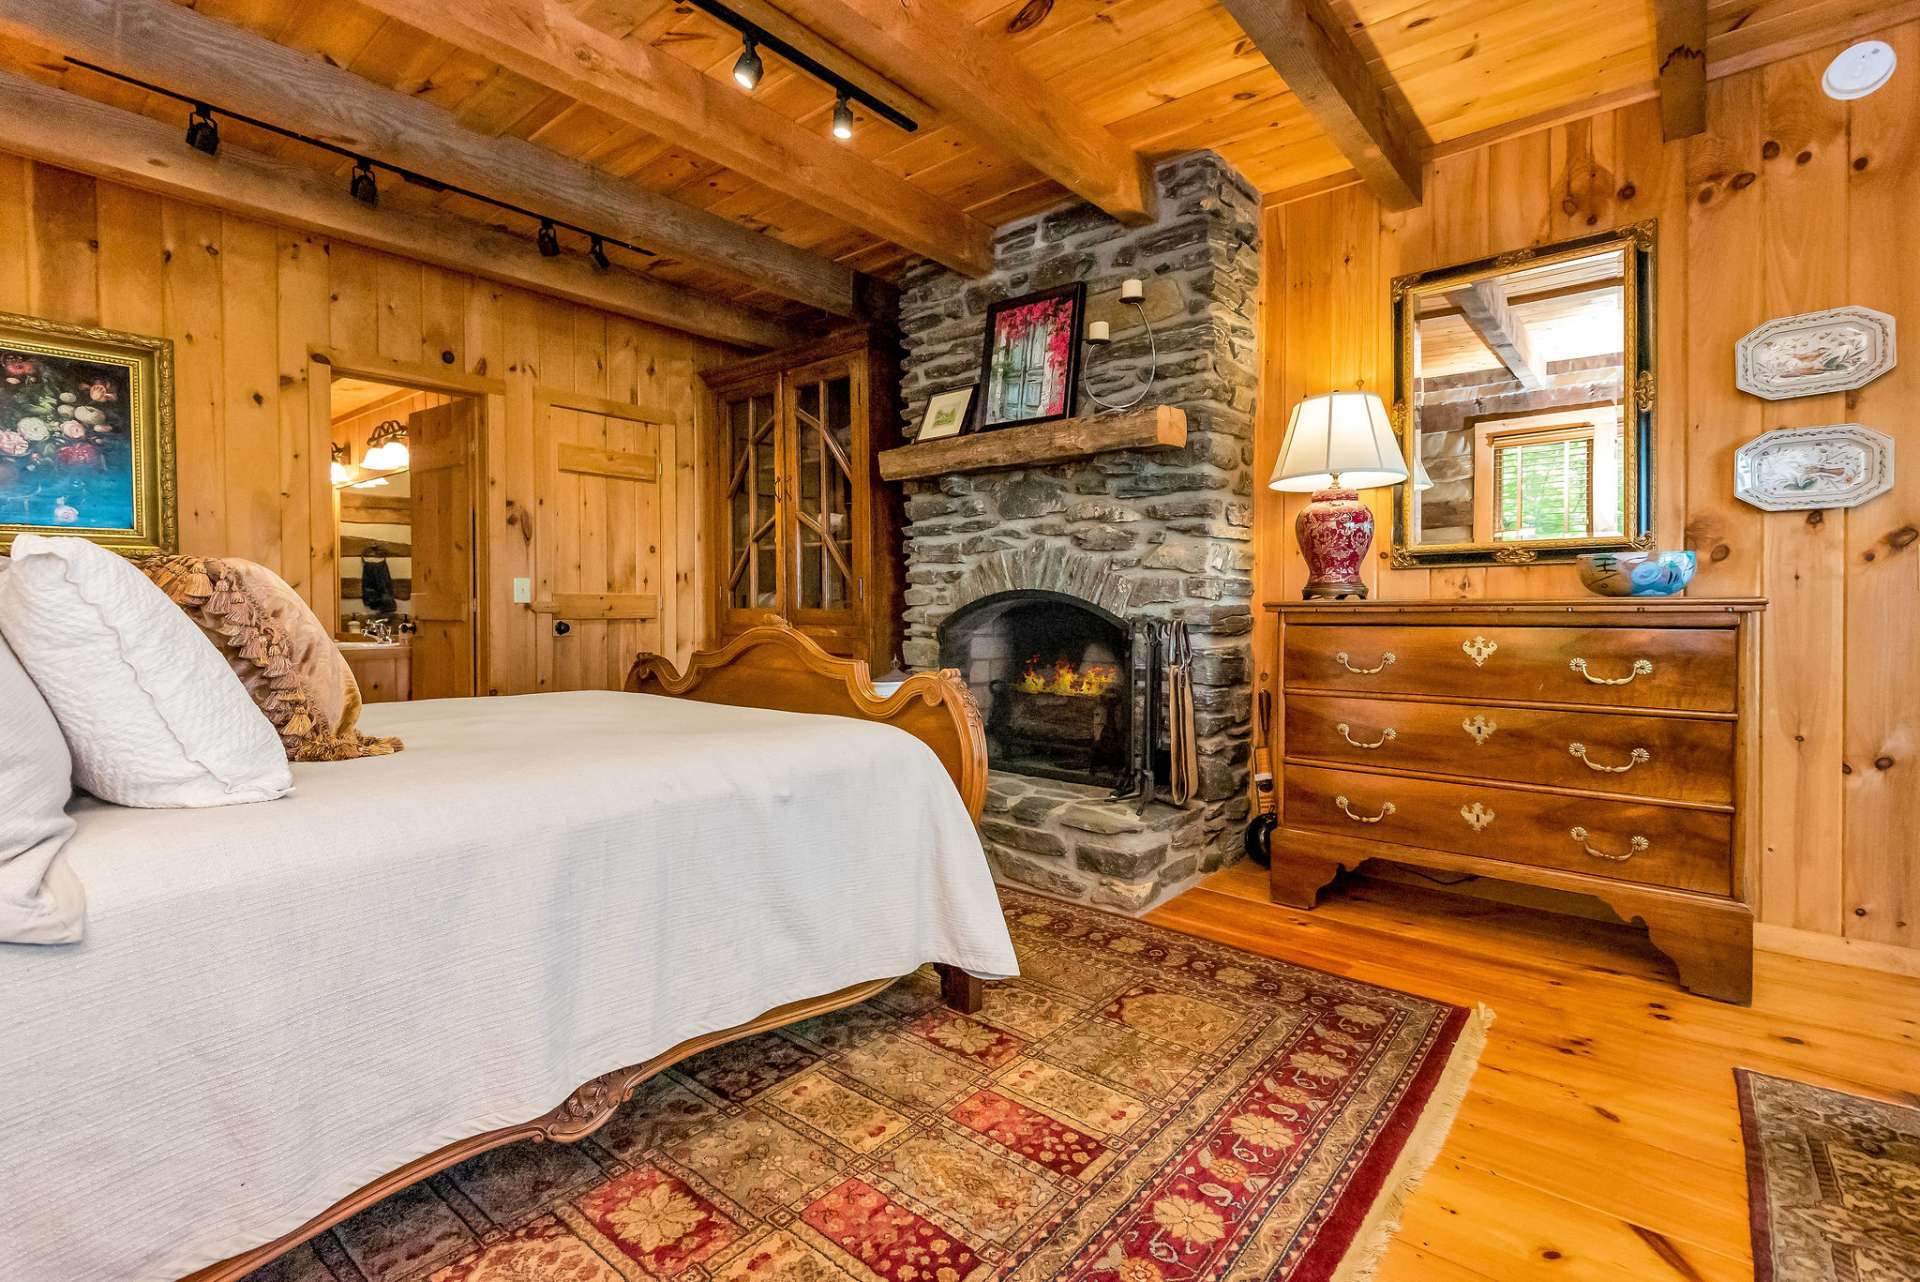 Master suite boasts its own wood-burning fireplace and his/her closets.